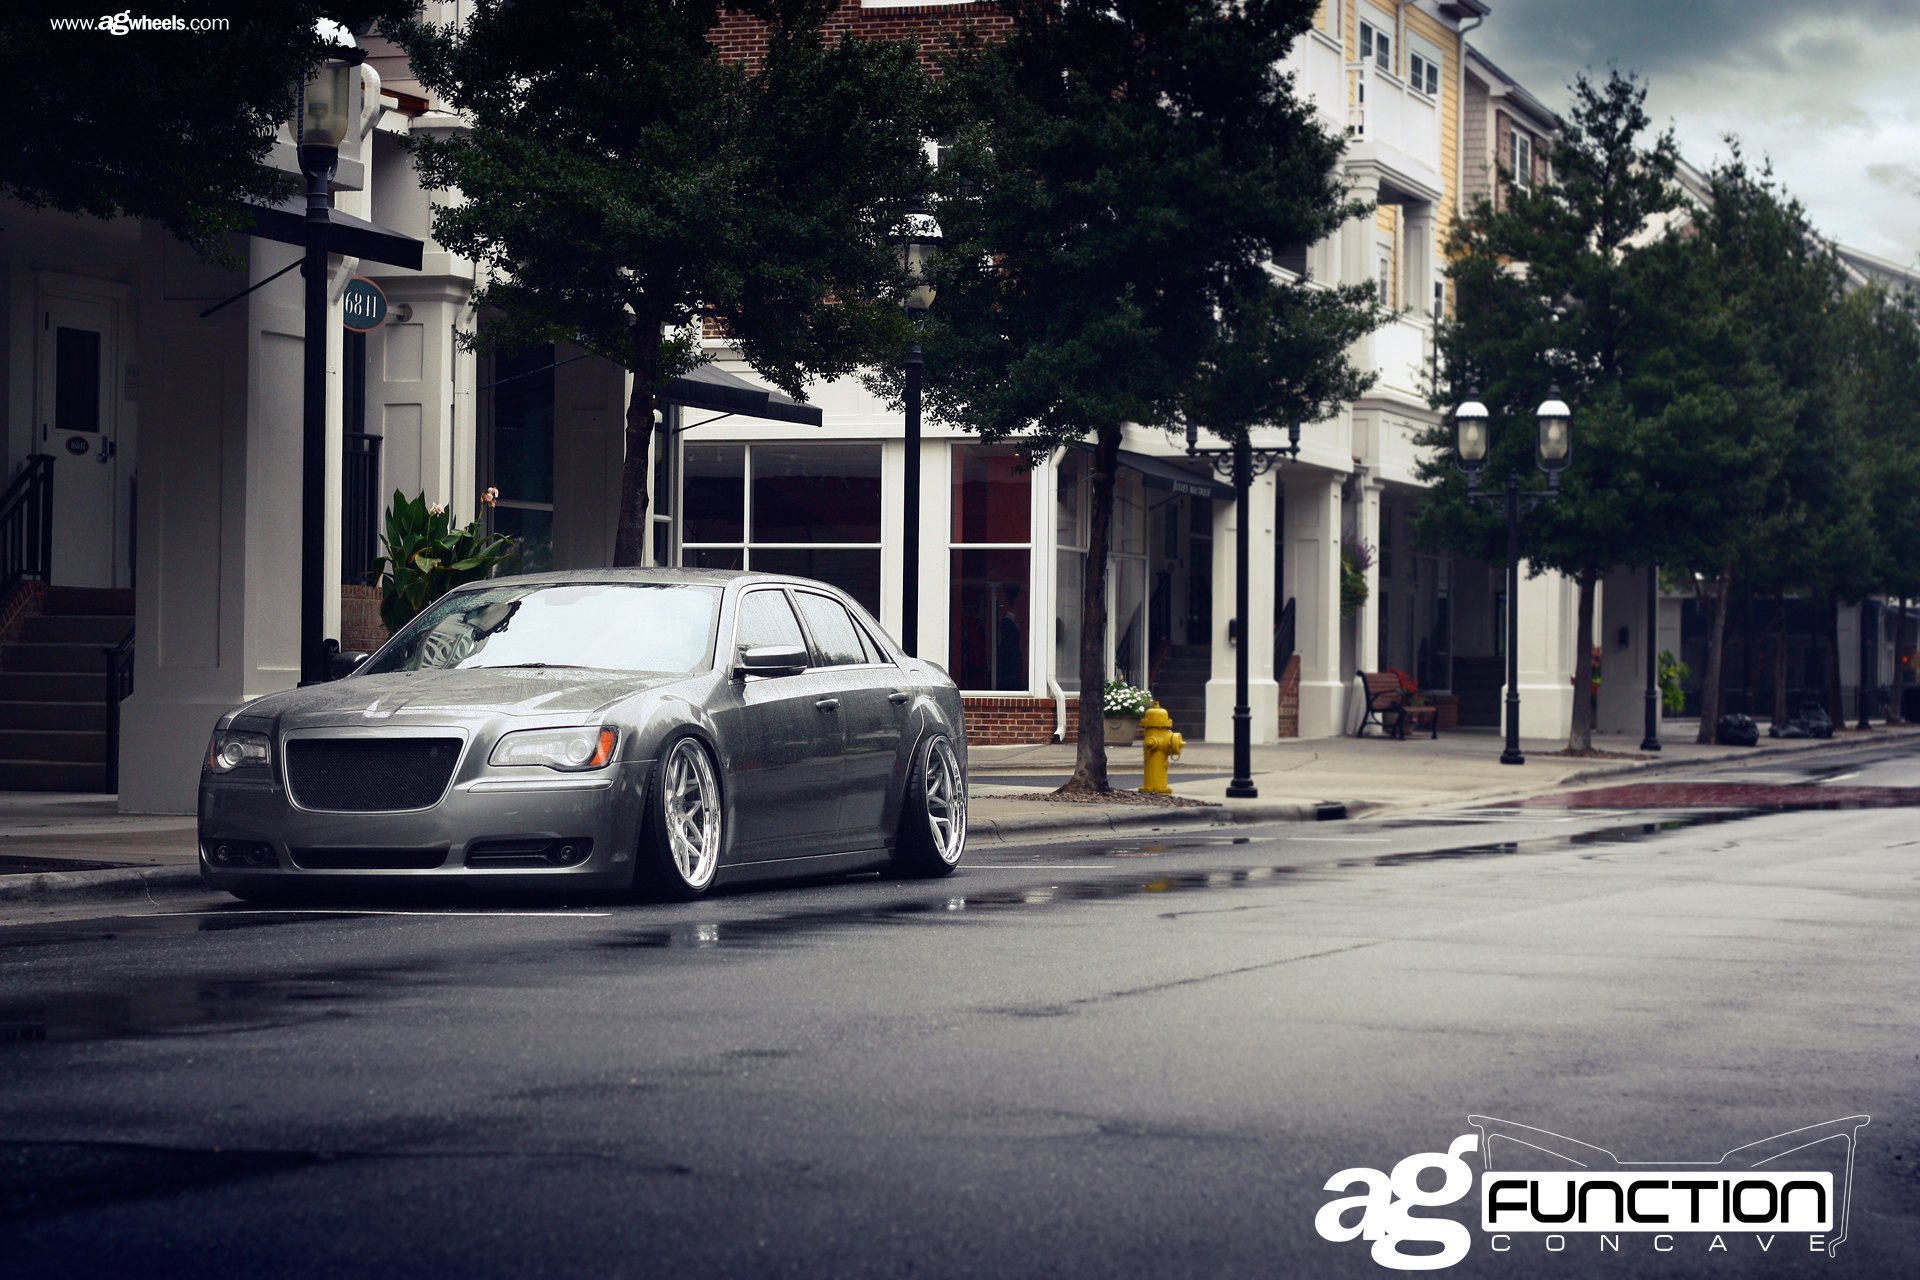 Gray Stanced Chrysler 300 with Aftermarket Headlights - Photo by Avant Garde Wheels